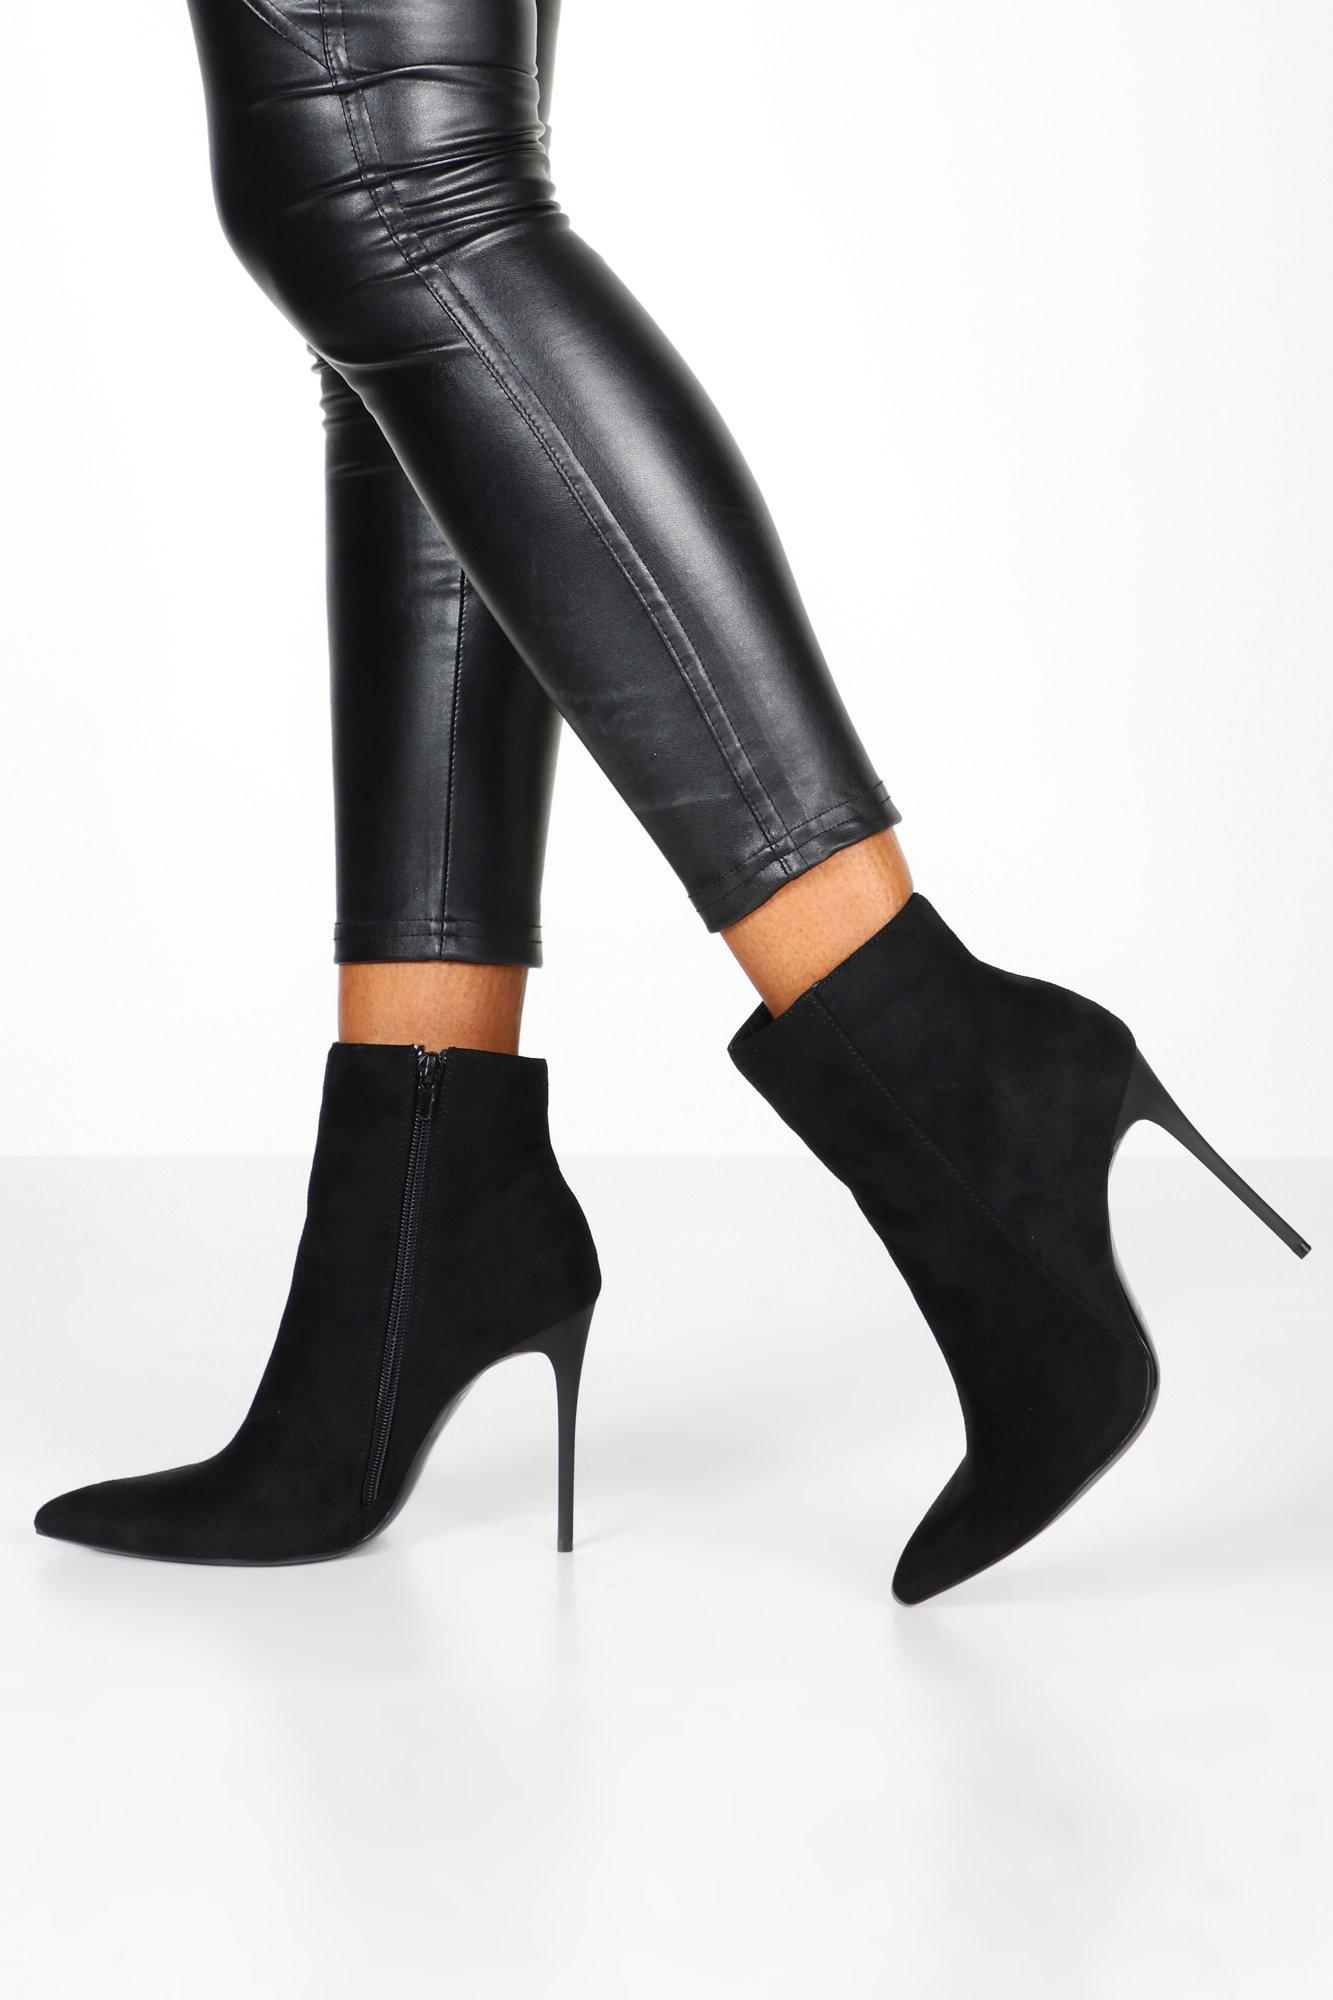 black leather stiletto ankle boots uk